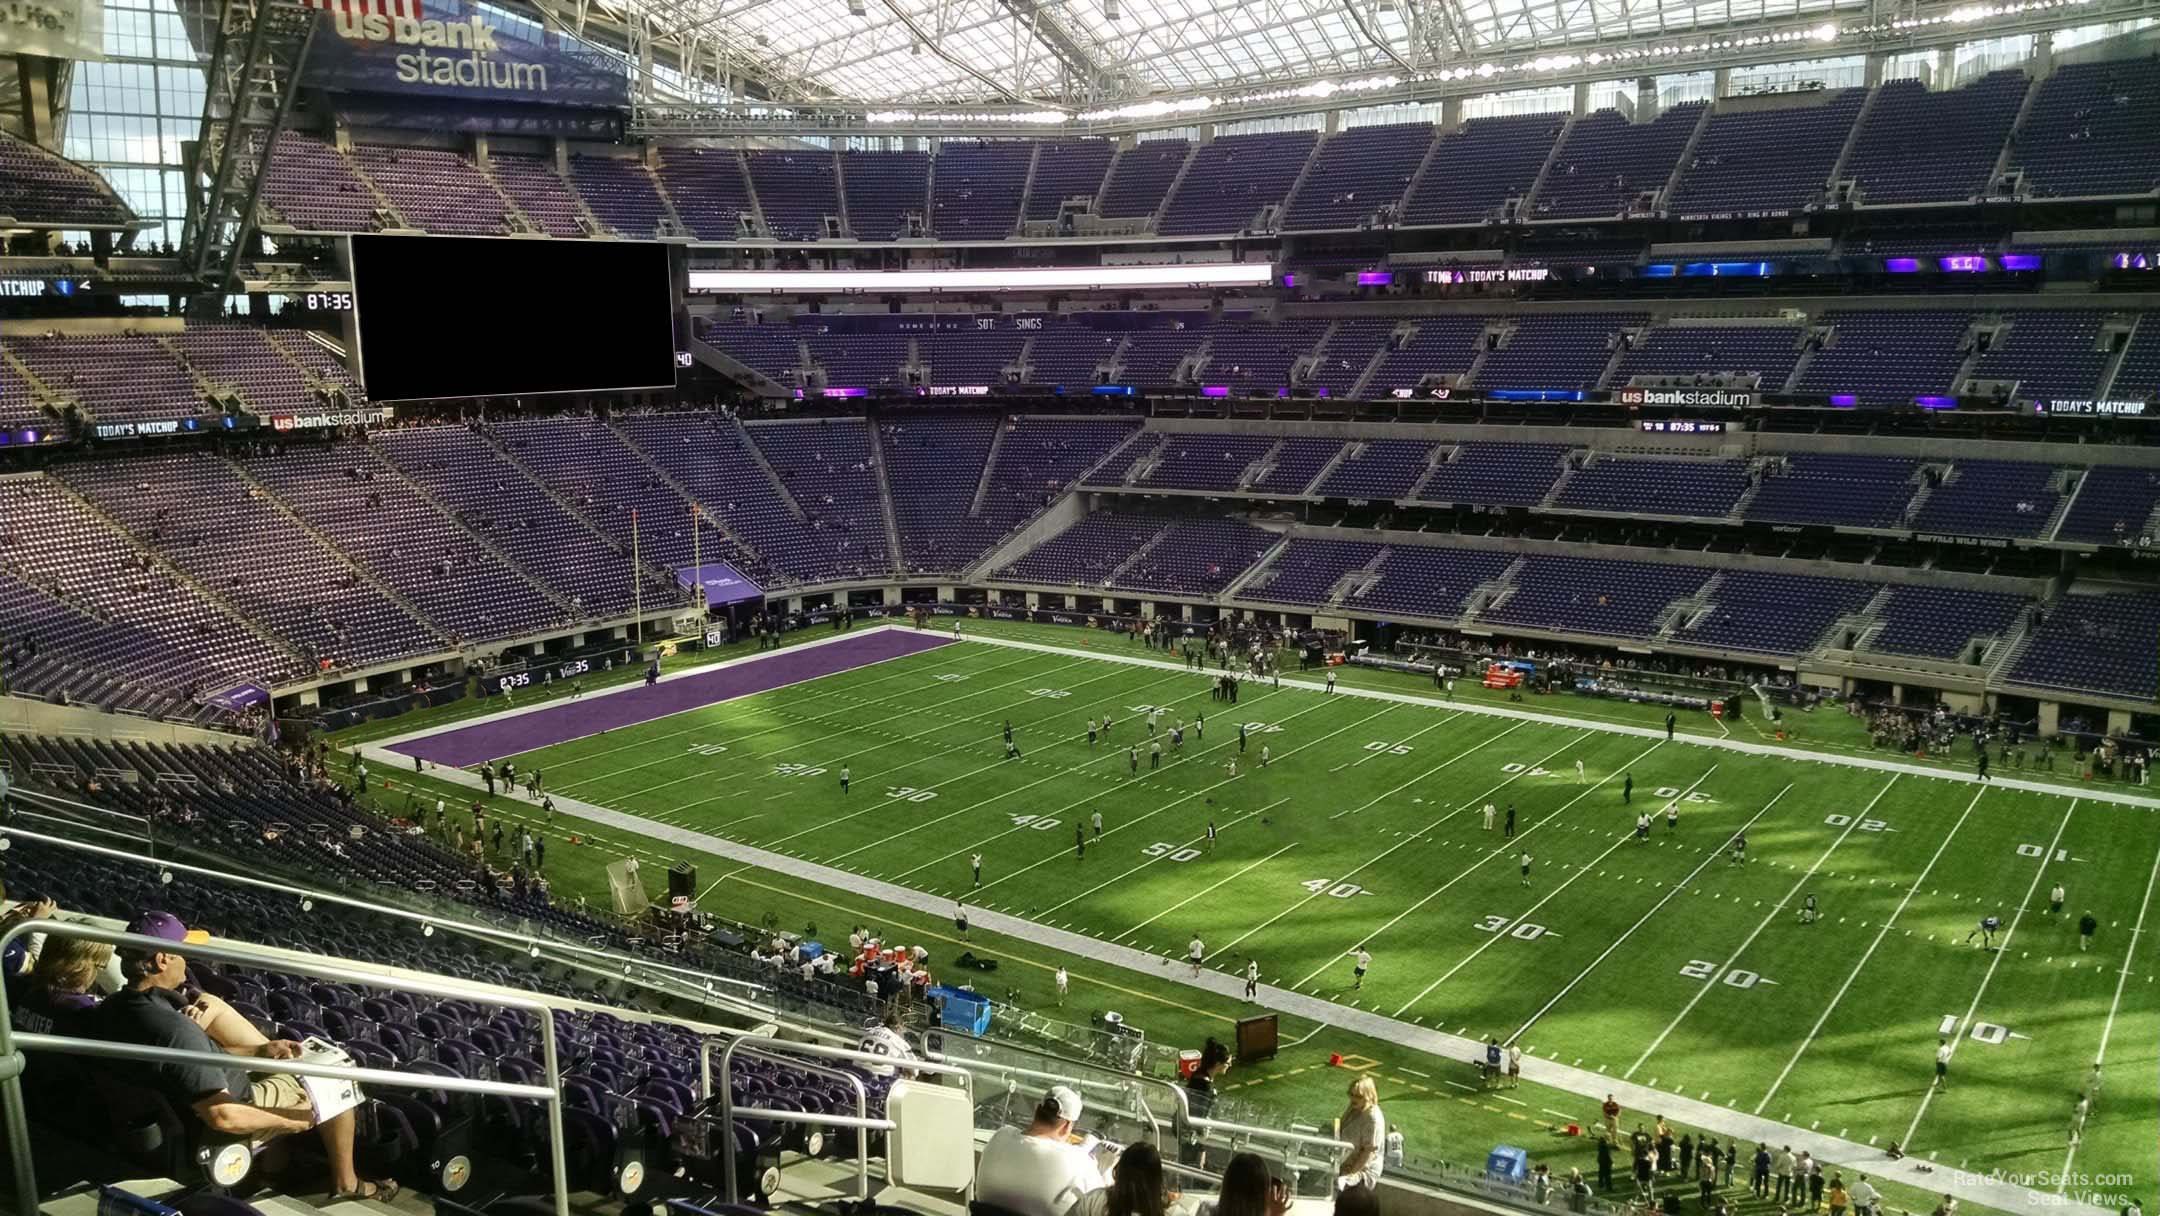 section 207, row 15 seat view  for football - u.s. bank stadium